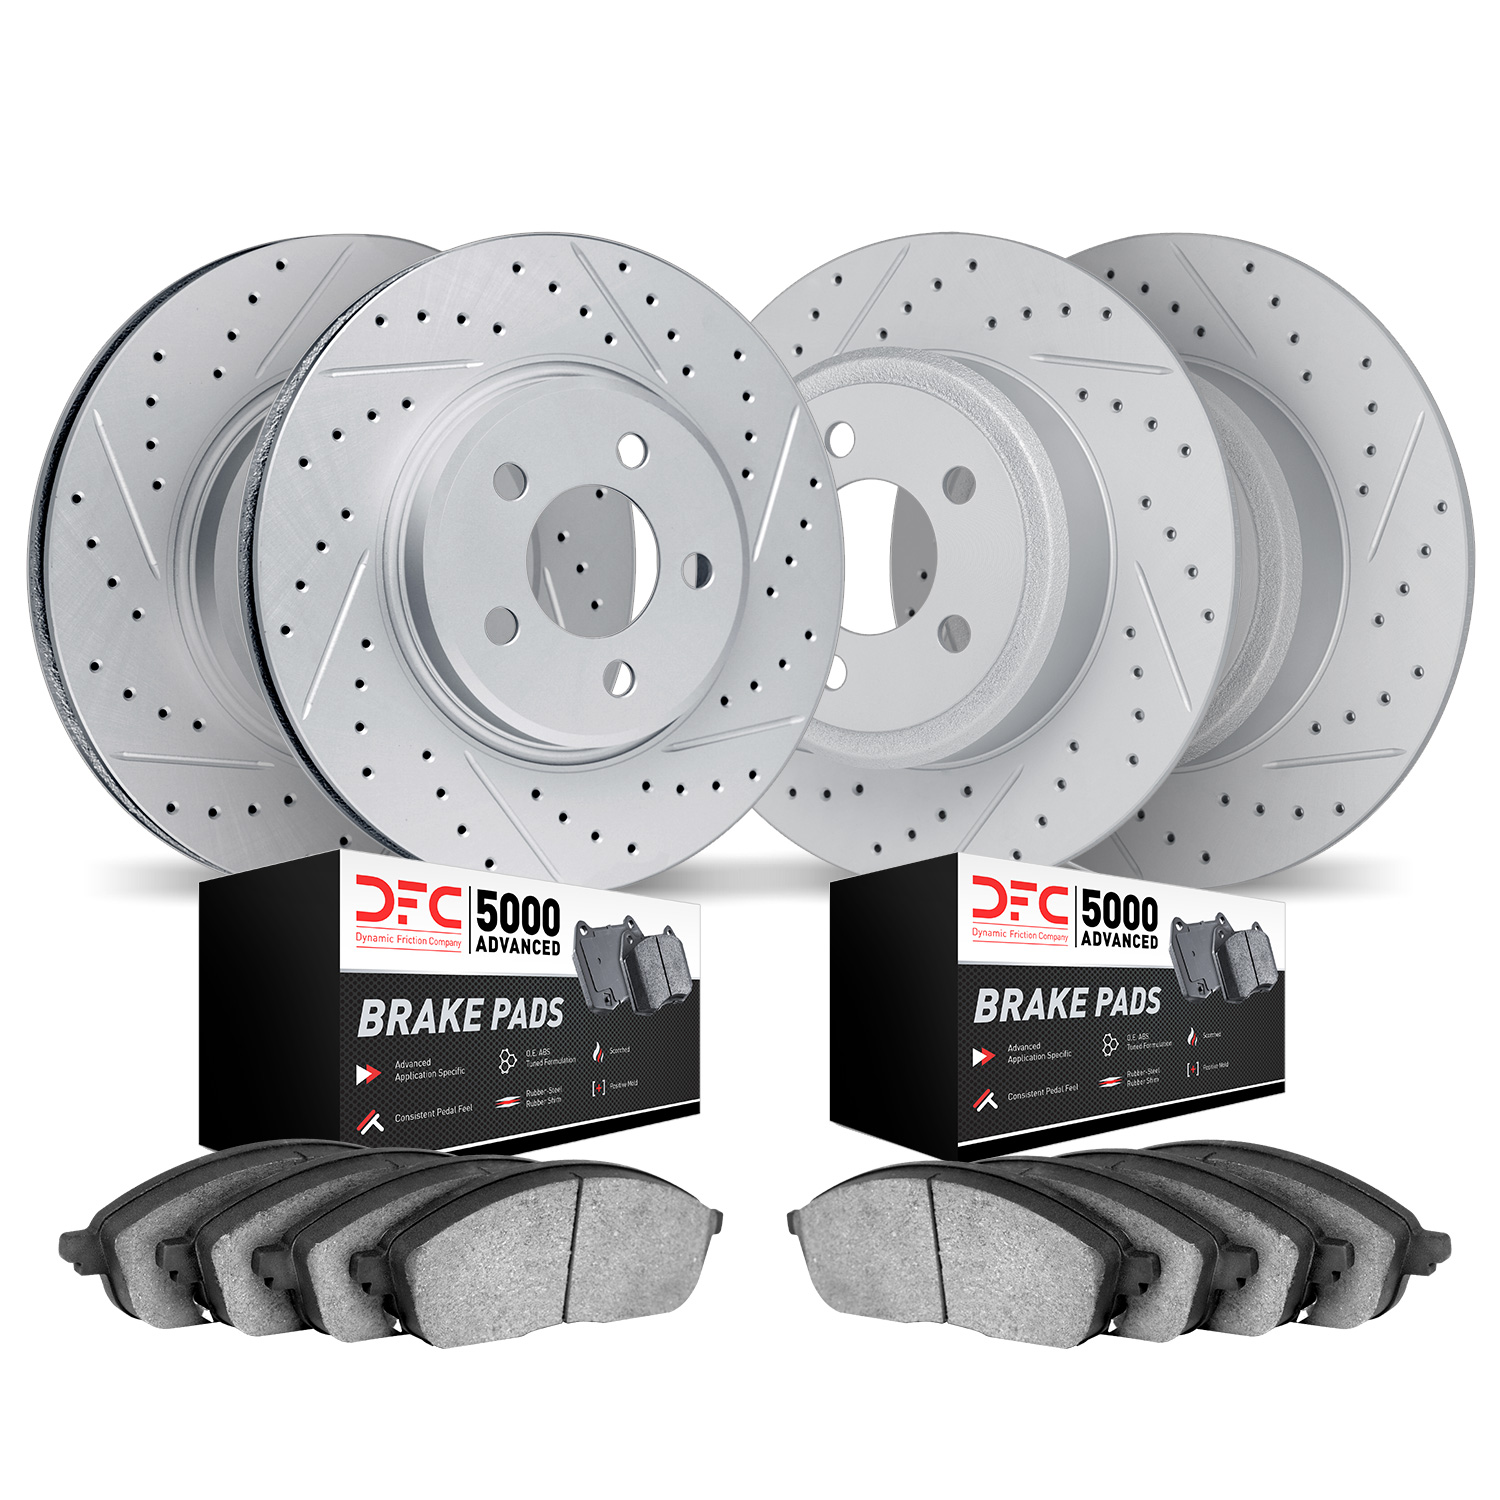 2504-45016 Geoperformance Drilled/Slotted Rotors w/5000 Advanced Brake Pads Kit, 2008-2009 GM, Position: Front and Rear